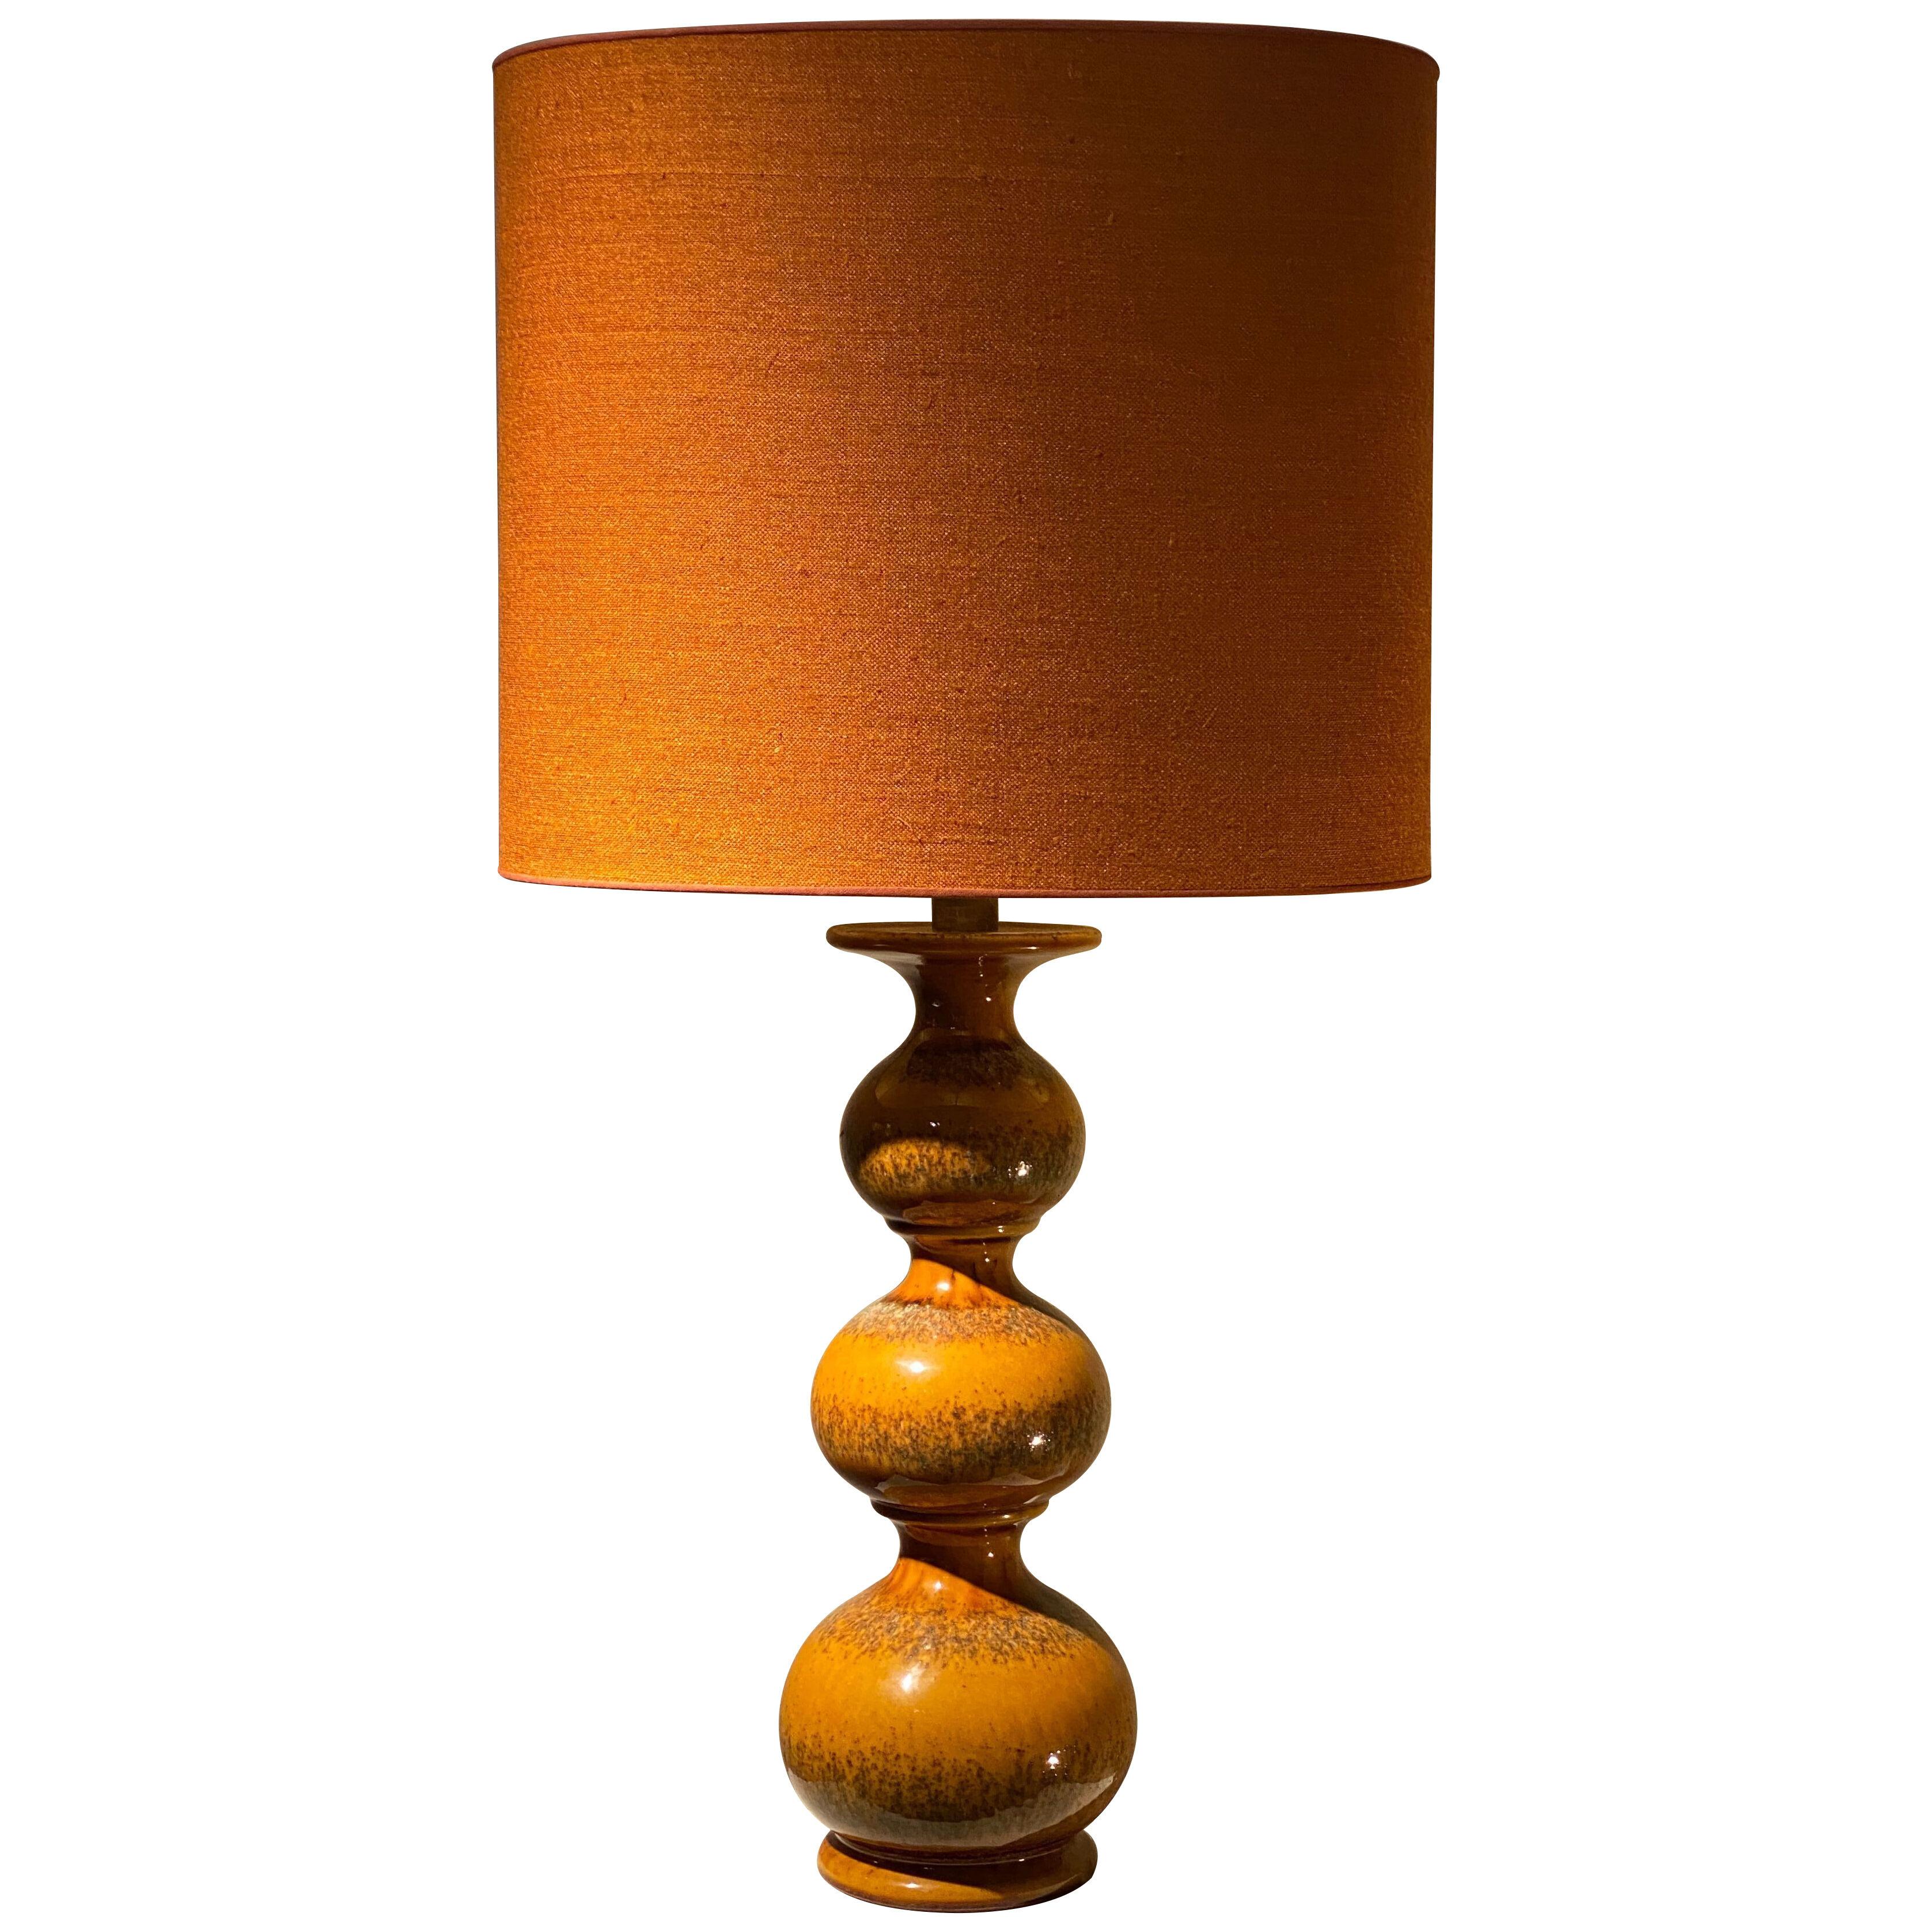 Ceramic Table Lamp Kaiser in an Orange color With New Oval Shade